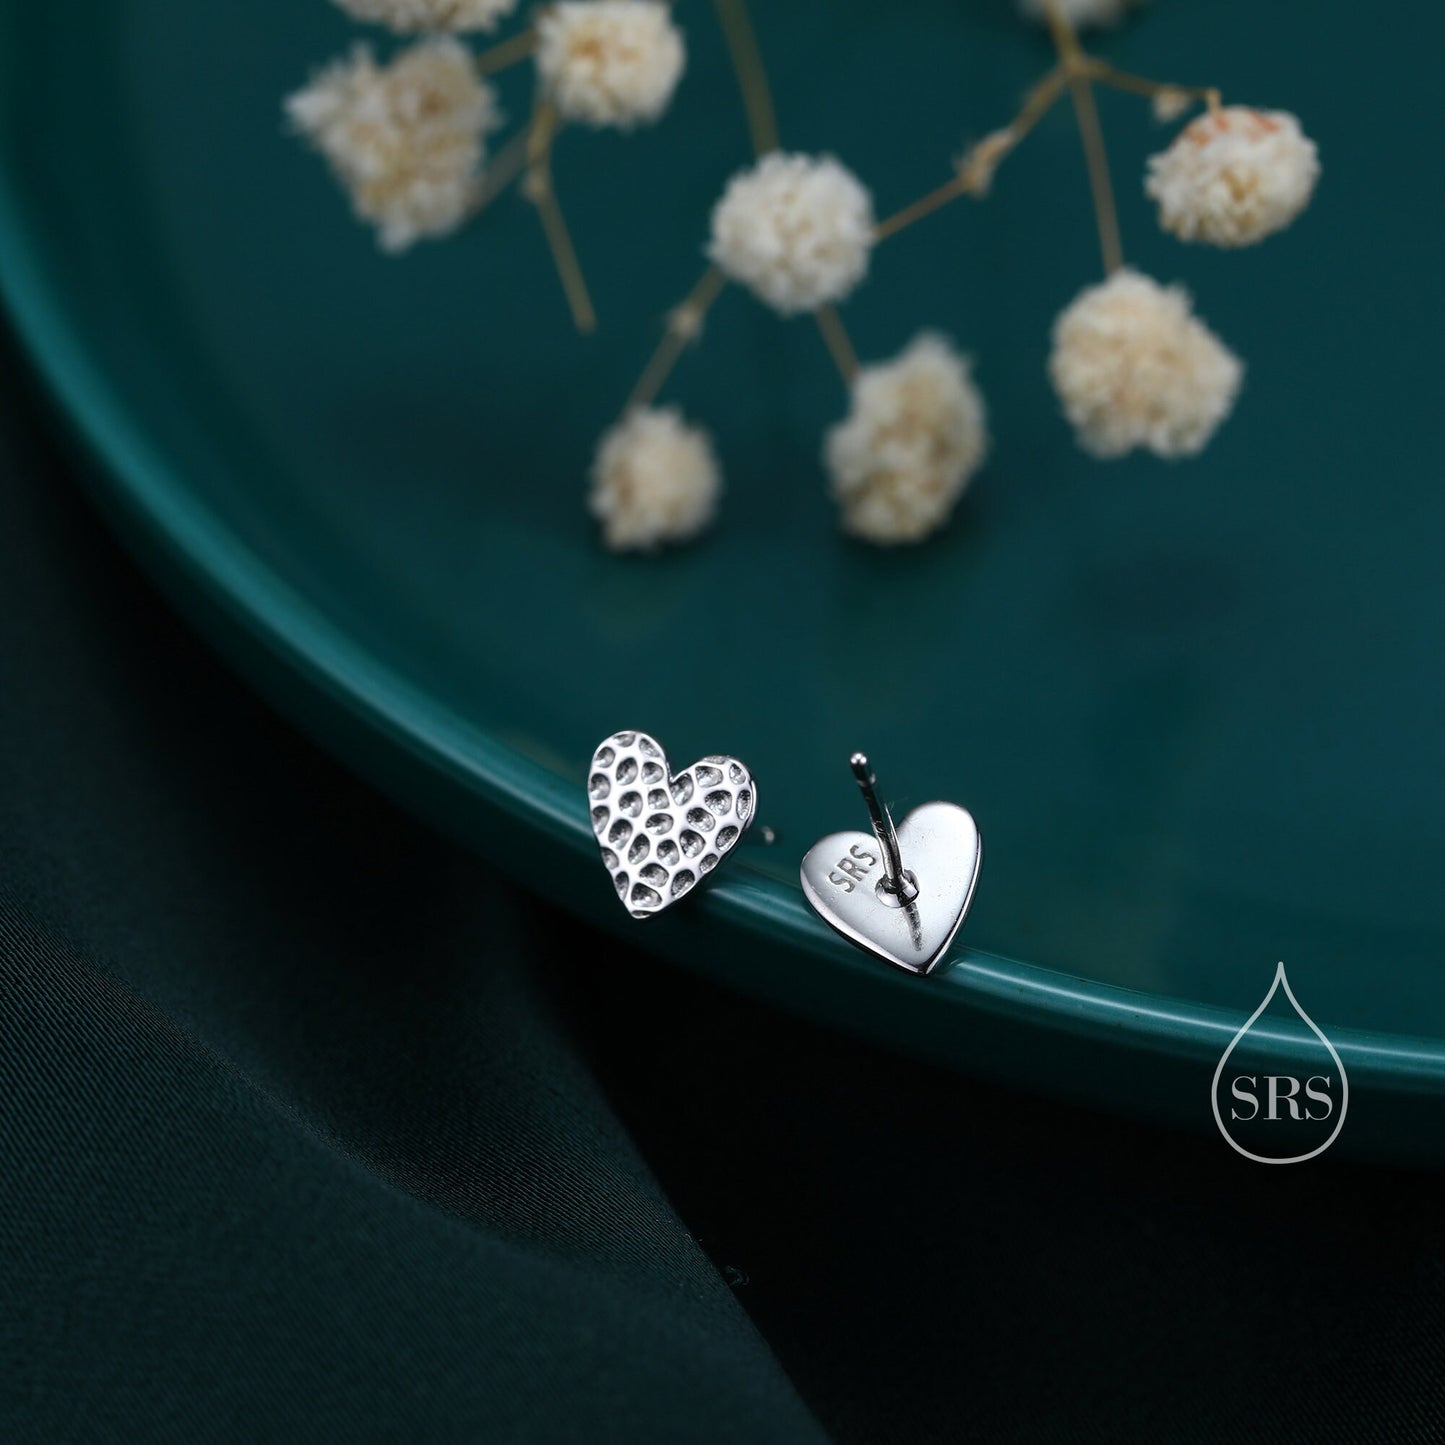 Hammered Heart Stud Earrings in Sterling Silver, Silver or Gold or Rose Gold, Heart Earrings, Fun and Quirky Jewellery